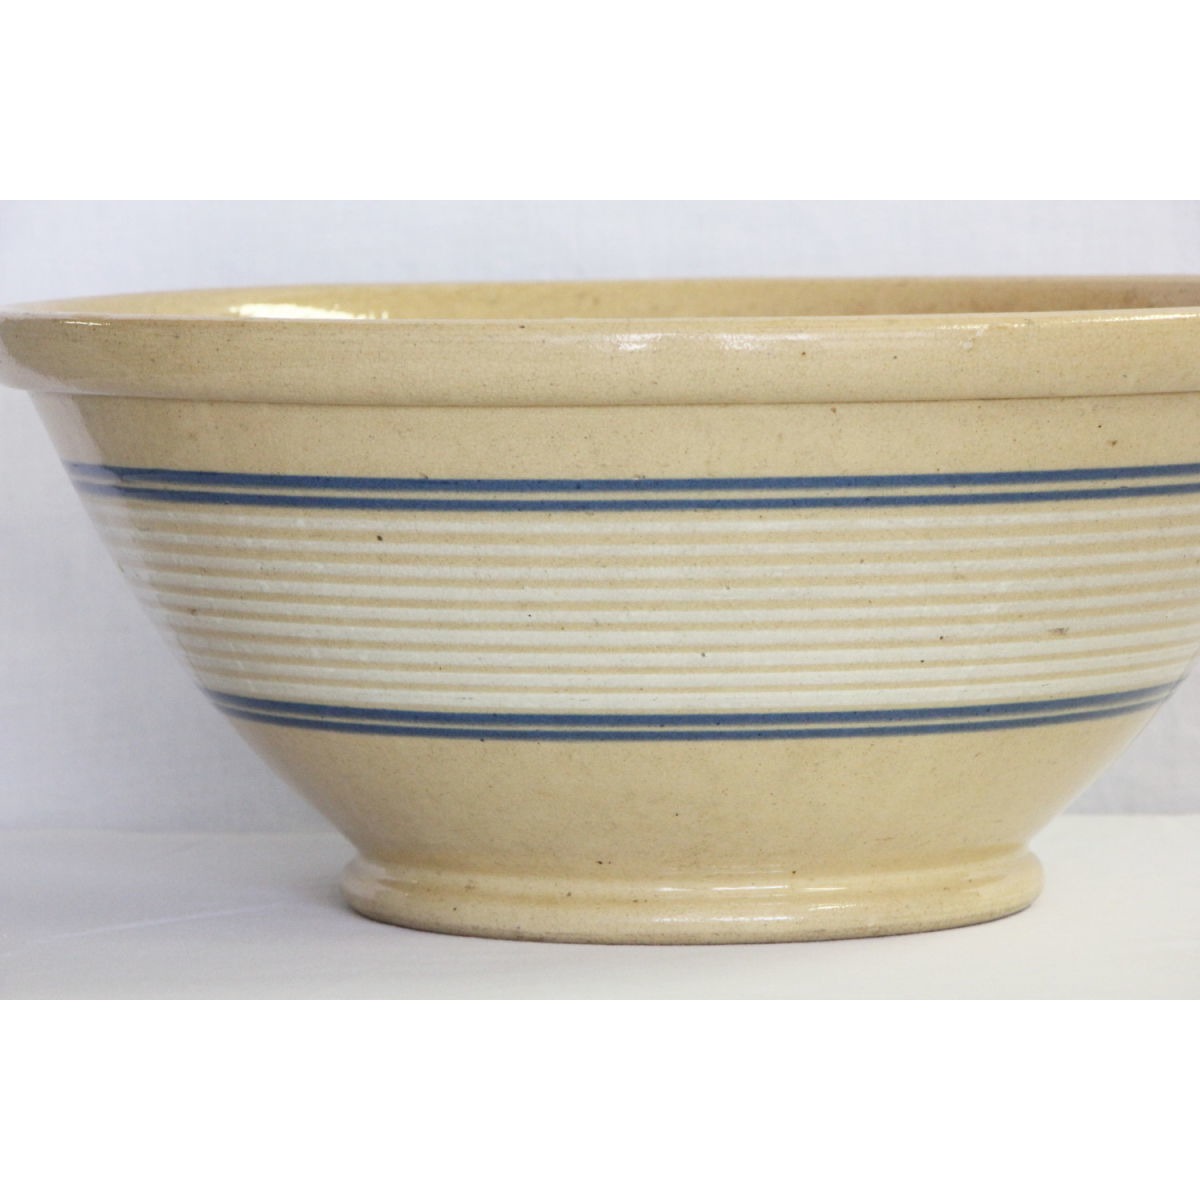 Outstanding Large Blue & White Banded Jeffords Yellowware Bowl